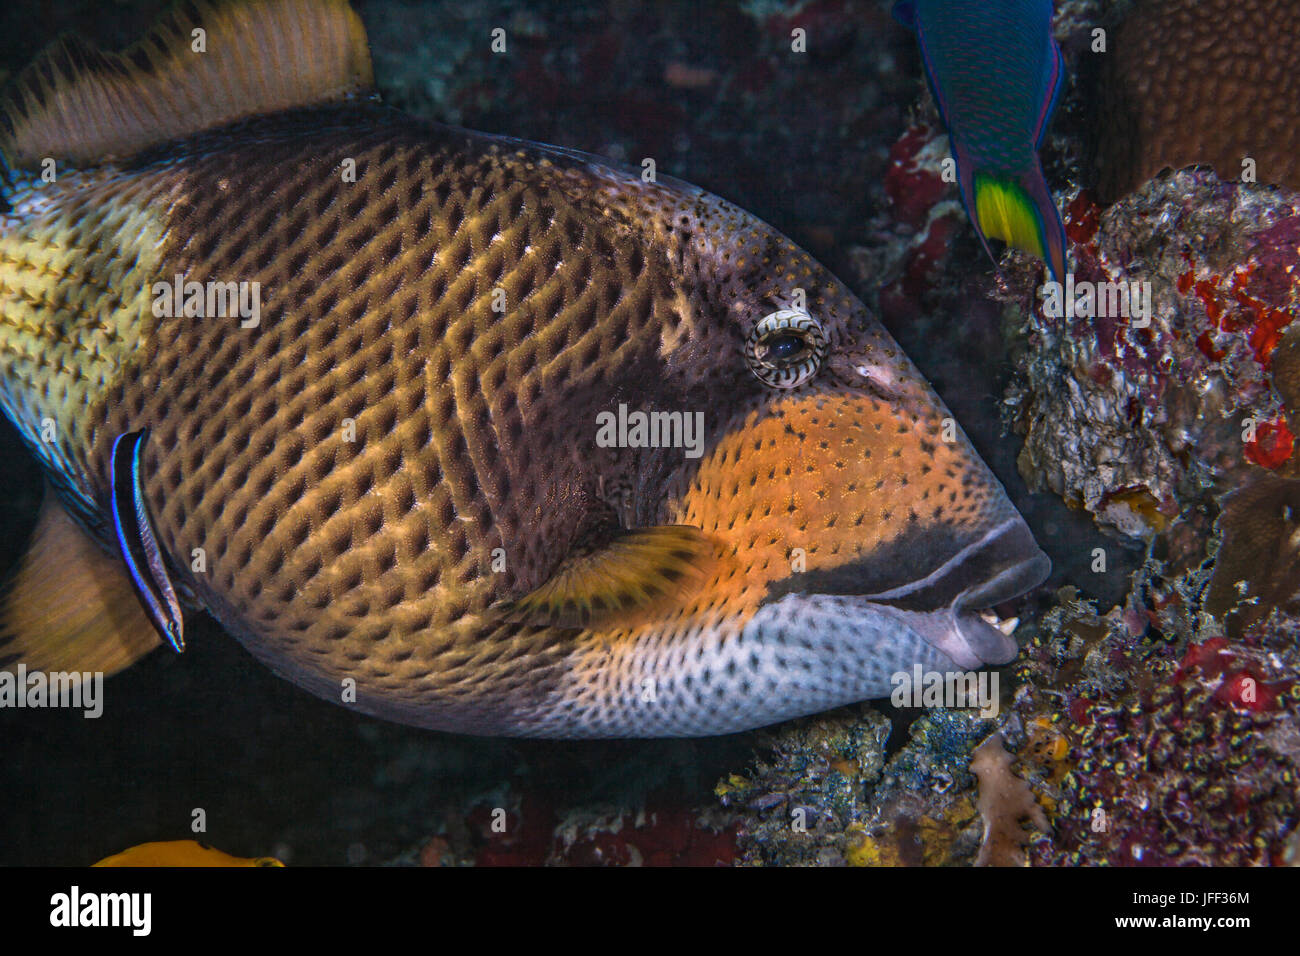 Titan triggerfish (Balistoides viridescens) eats coral while bluestreak wrasse feeds and cleans as well. Indian Ocean, Maldives. Stock Photo